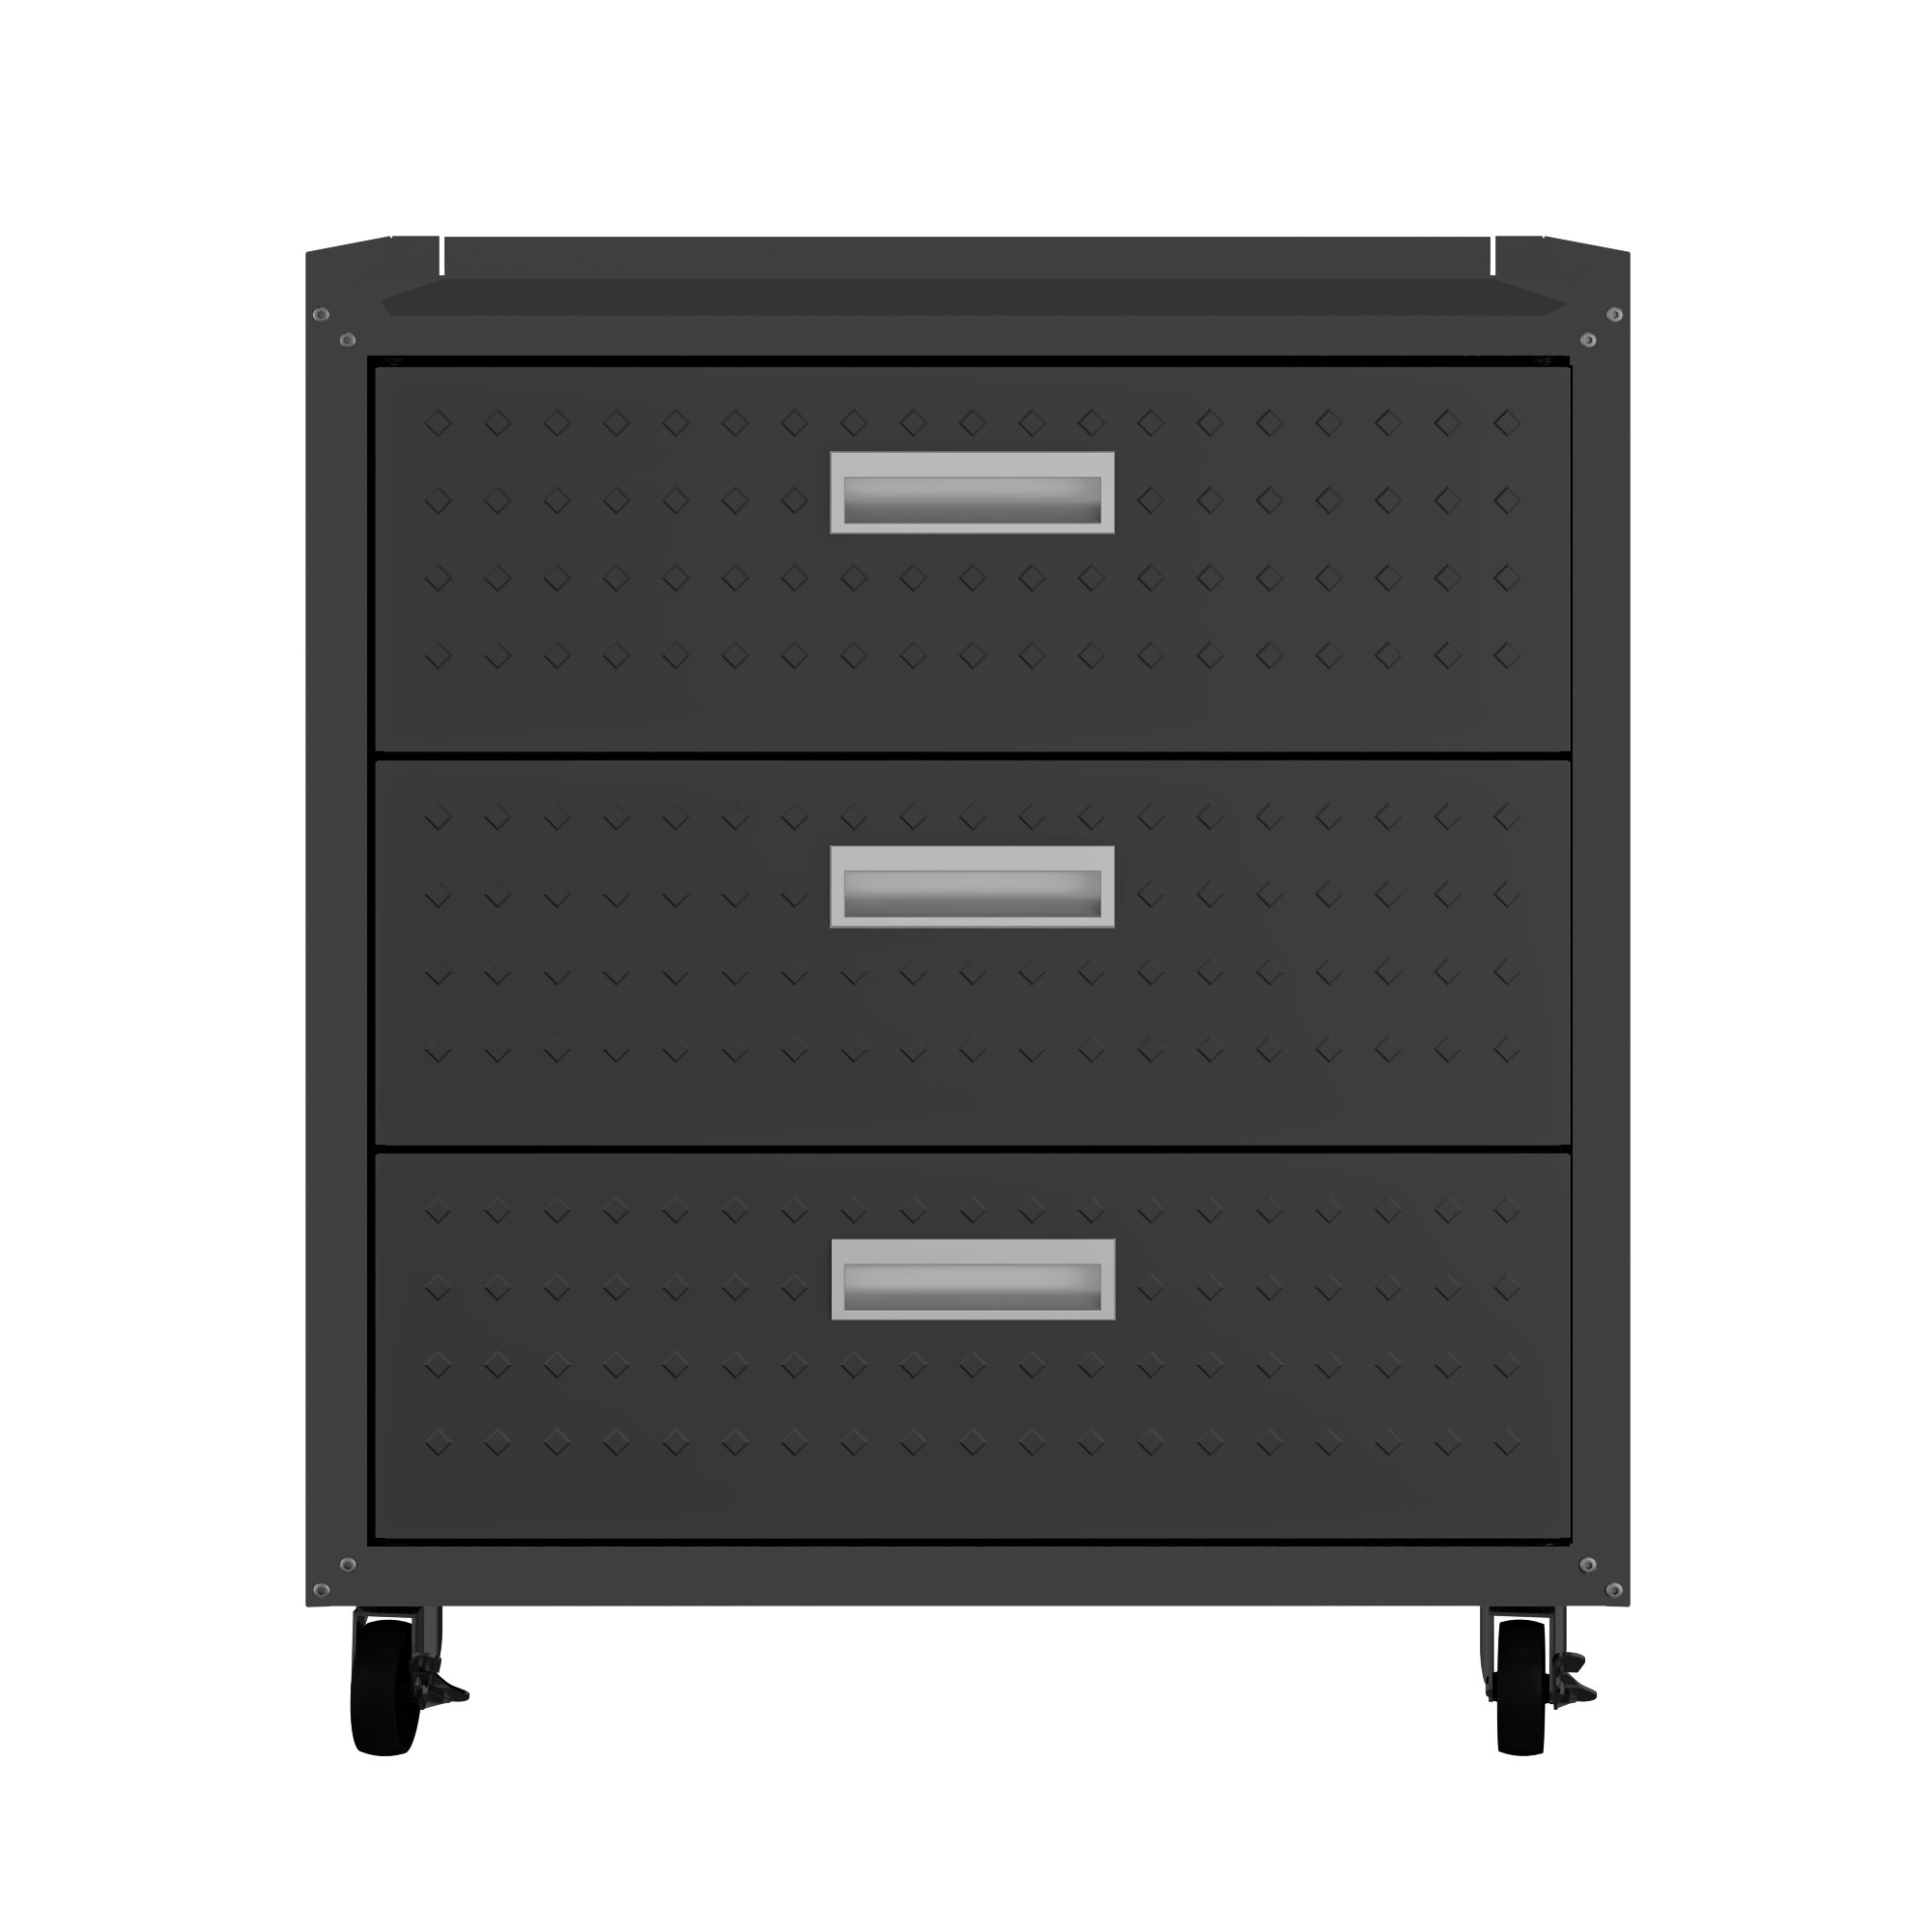 Manhattan Comfort, Fortress Mobile Garage Drawer Chest Charcoal Grey, Height 32.1 in, Width 30.3 in, Color Dark Gray, Model 4GMCC